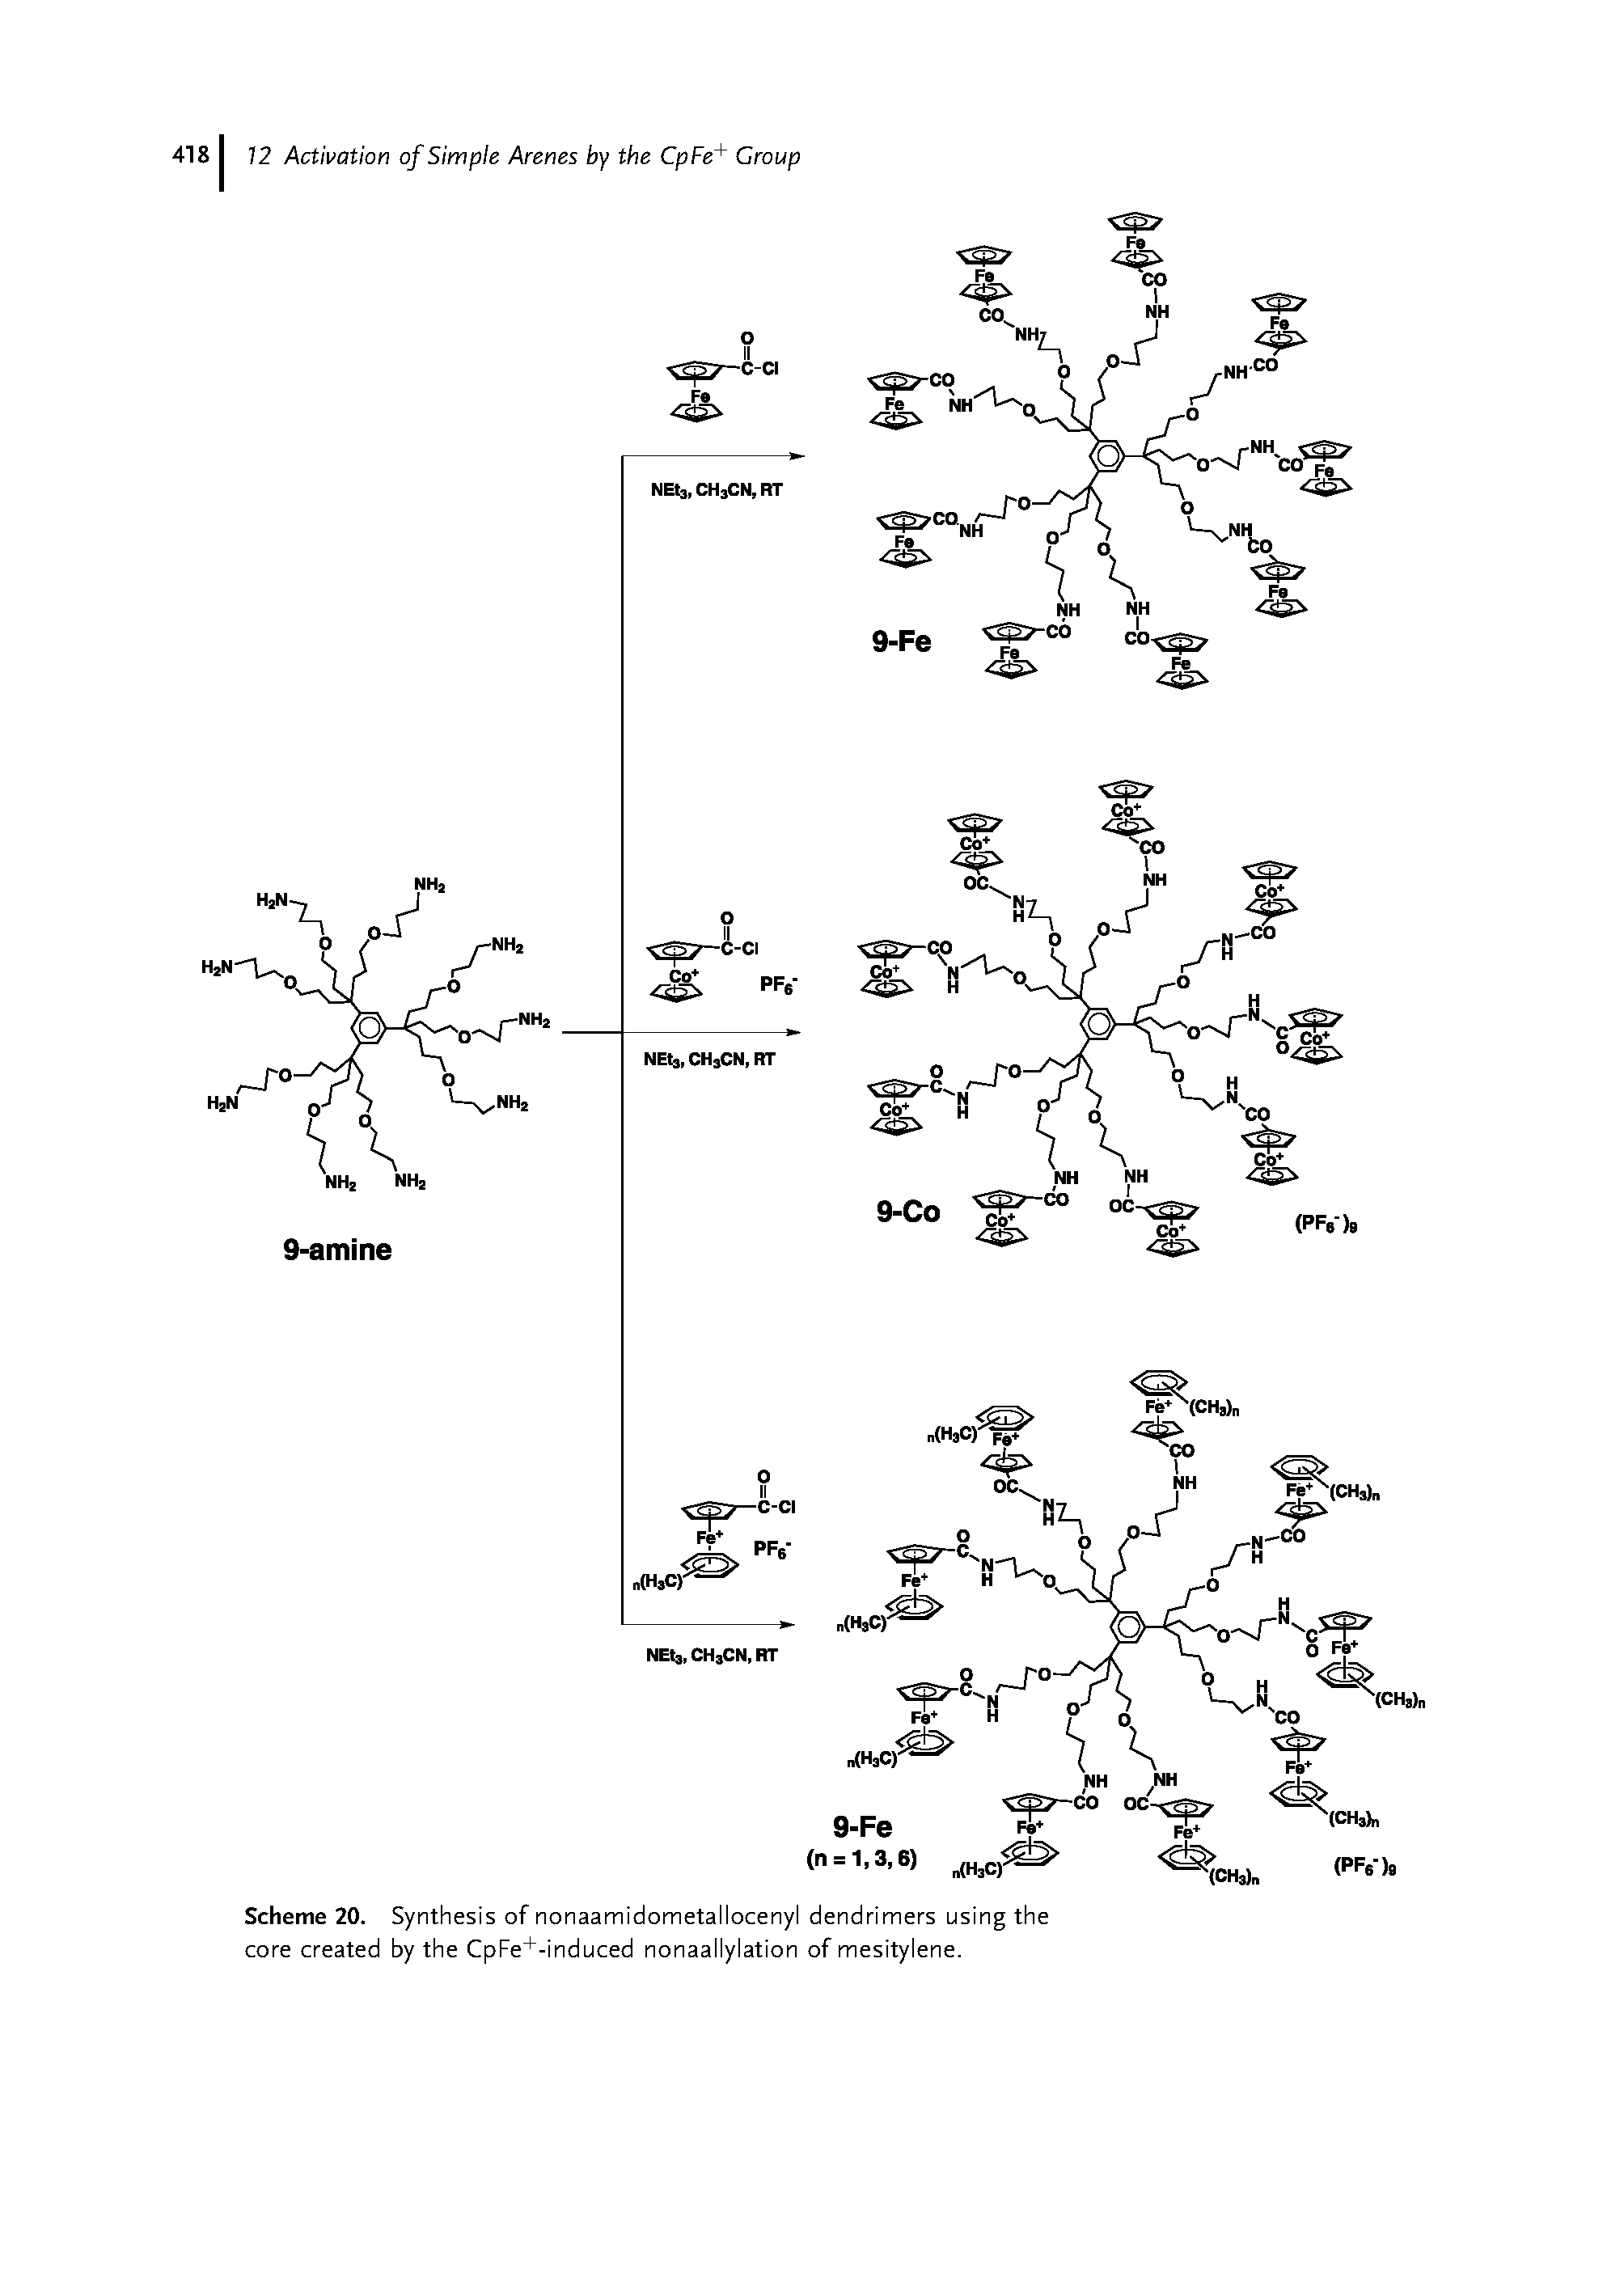 Scheme 20. Synthesis of nonaamidometallocenyl dendrimers using the core created by the CpFe+-induced nonaallylation of mesitylene.